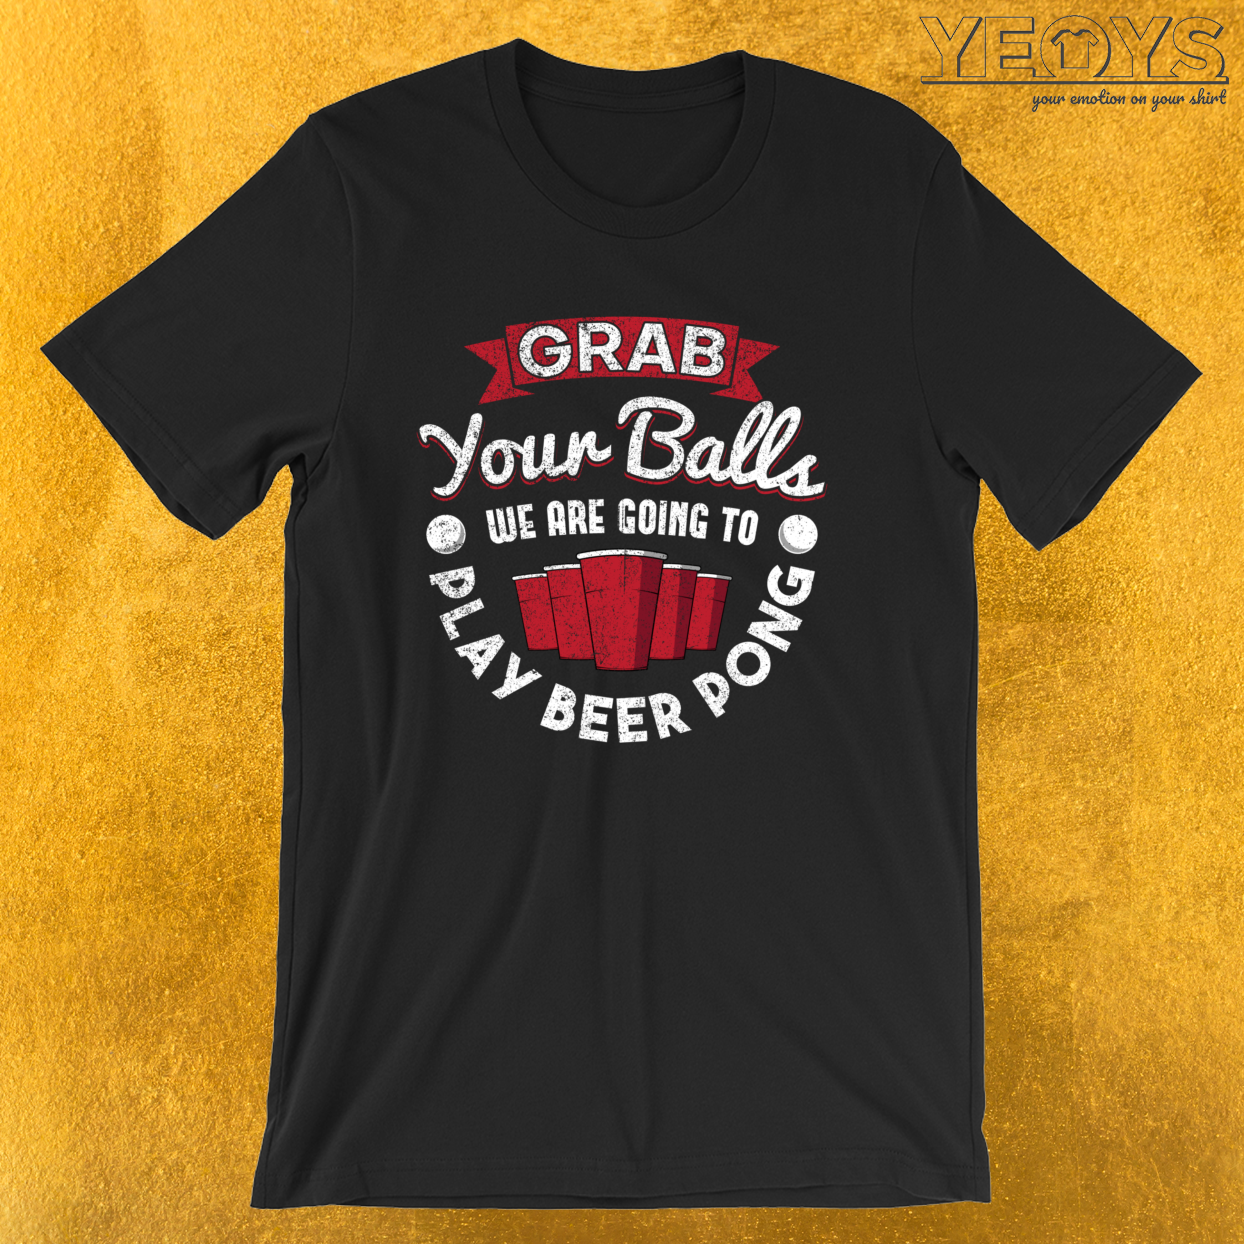 Grab Your Balls Play Beer Pong – Funny Beer Pong Tee